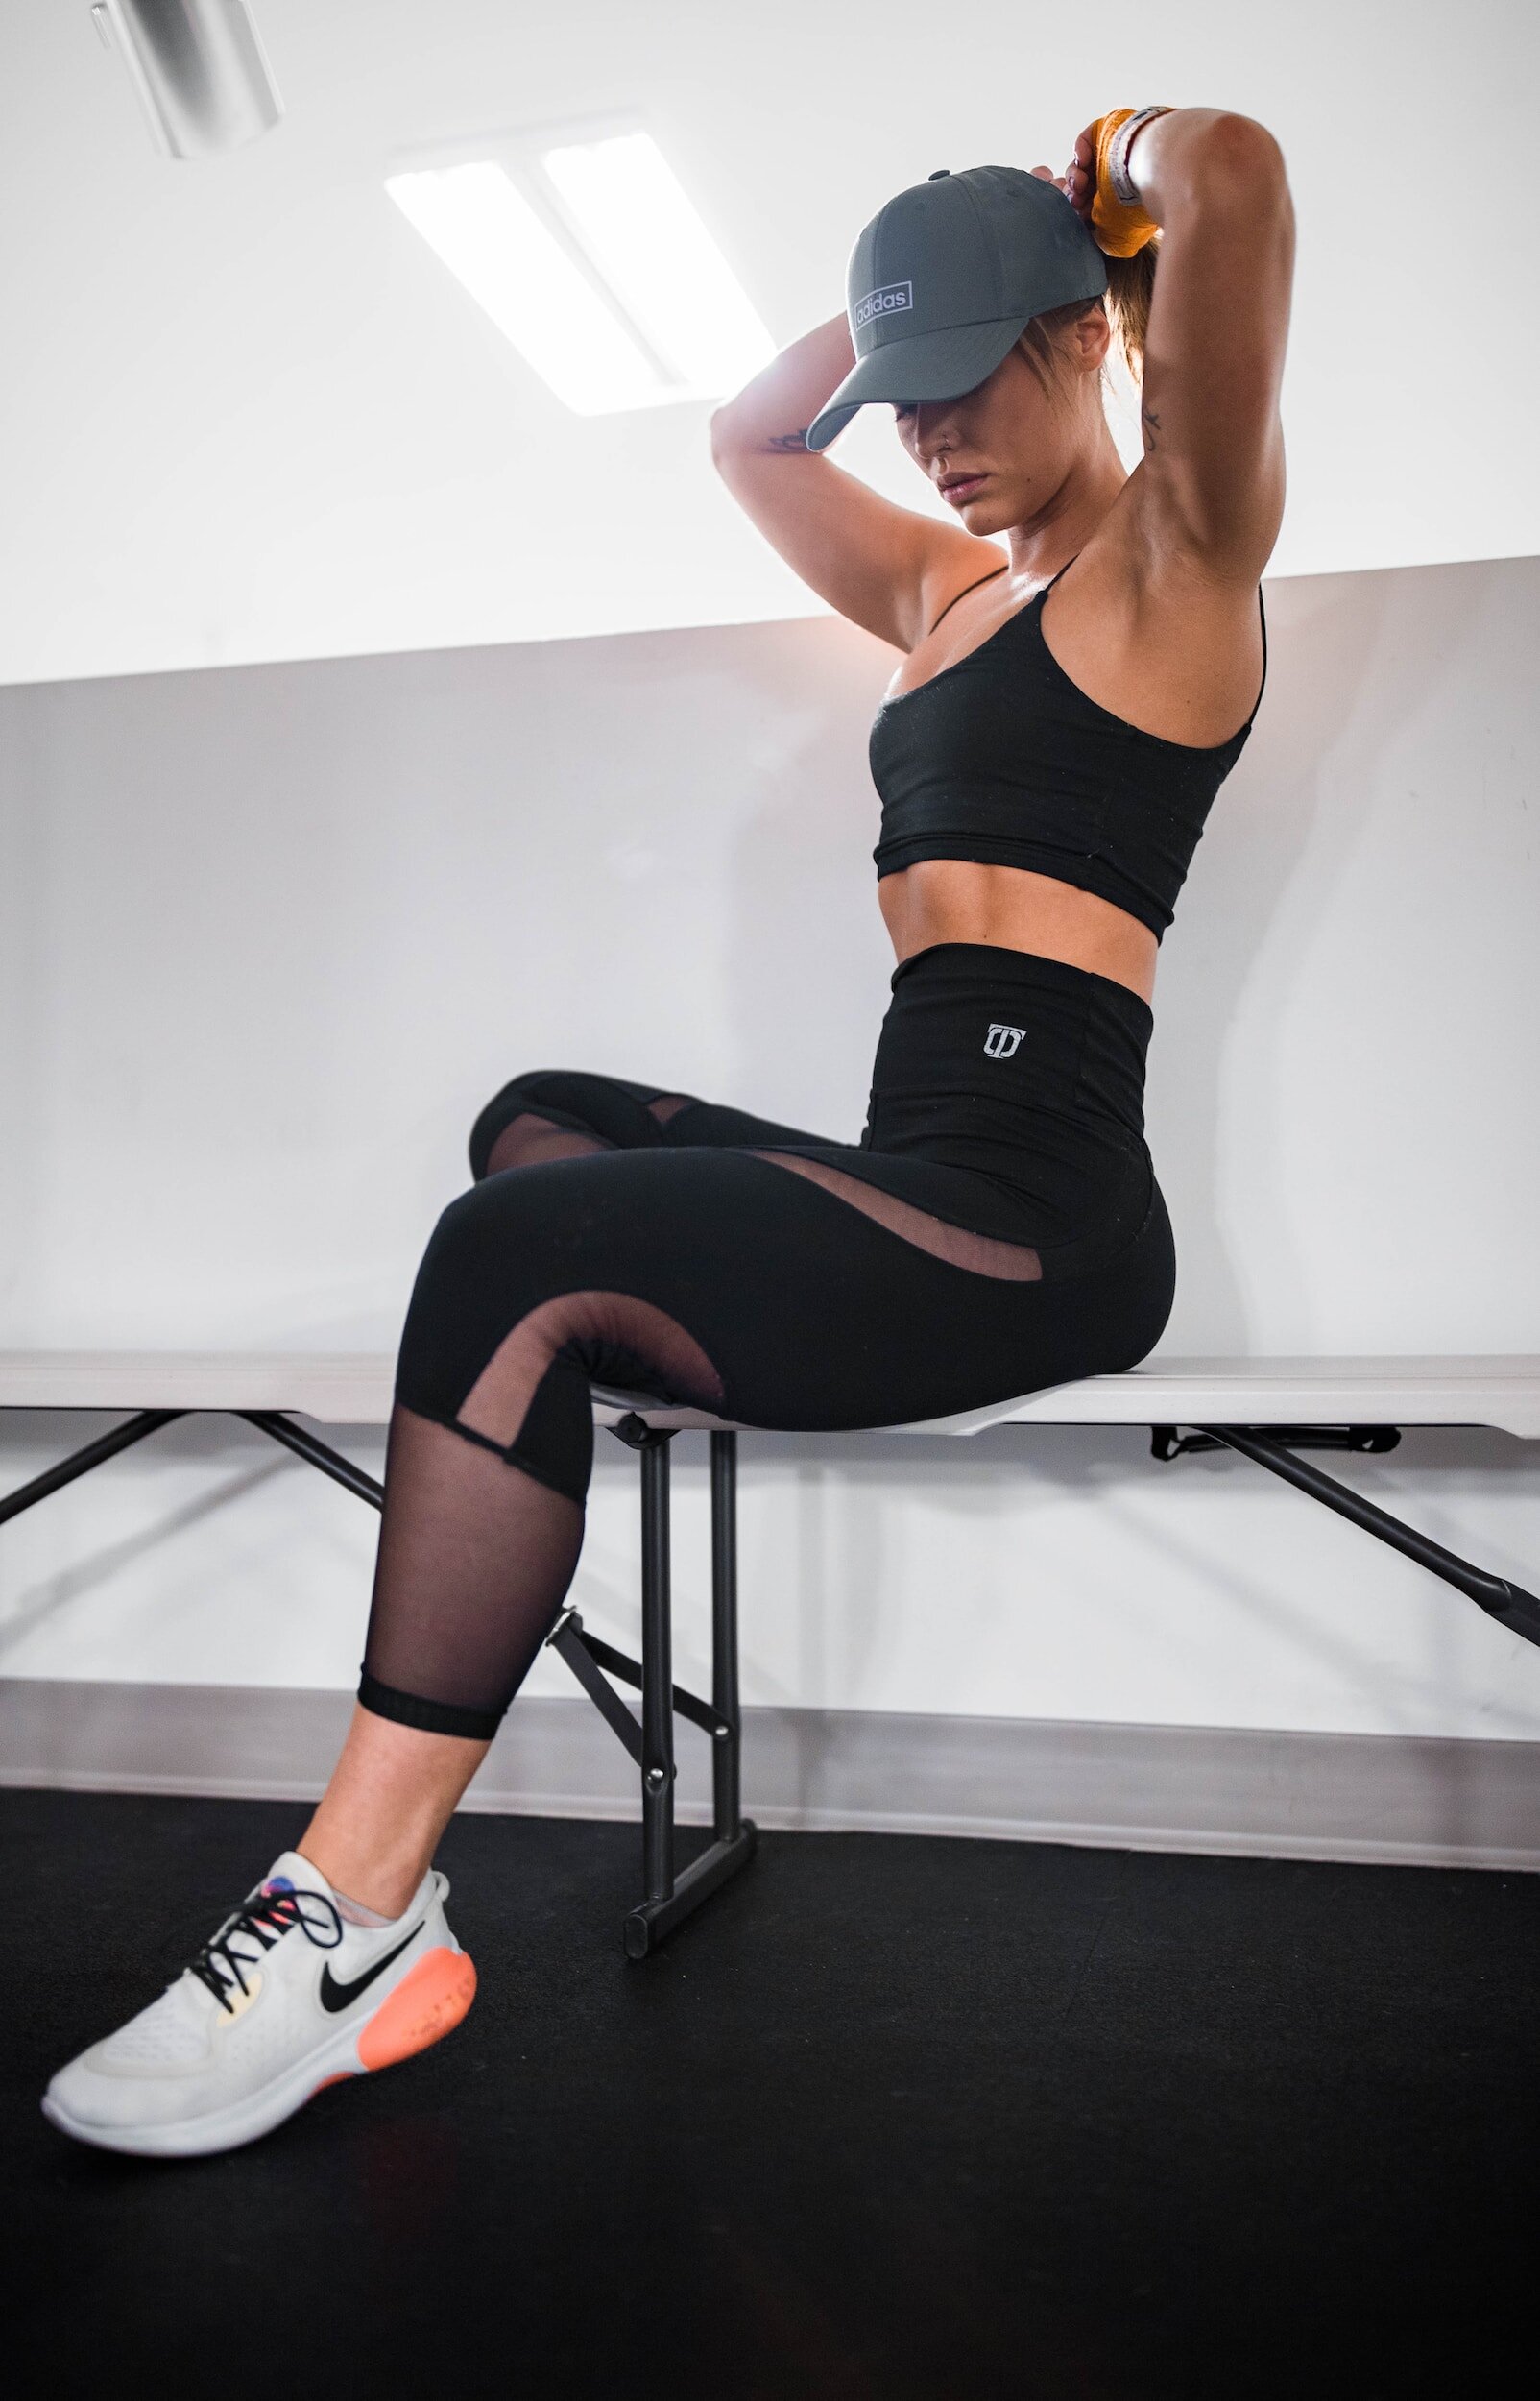 23 Pairs Of Workout Leggings That People Actually Swear By